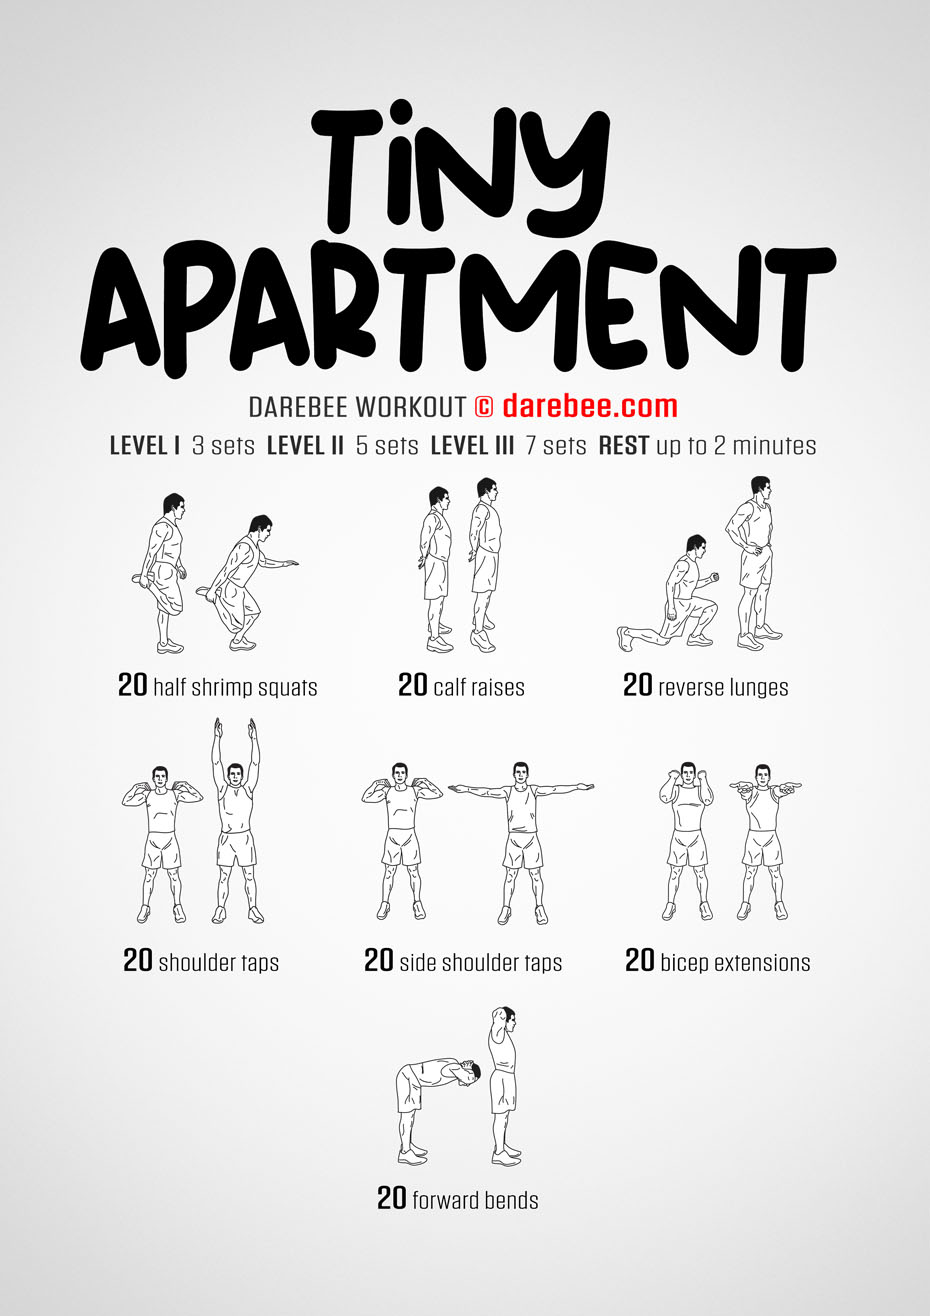 Tiny Apartment is a Darebee home-fitness workout you can do in virtually any tight space. 